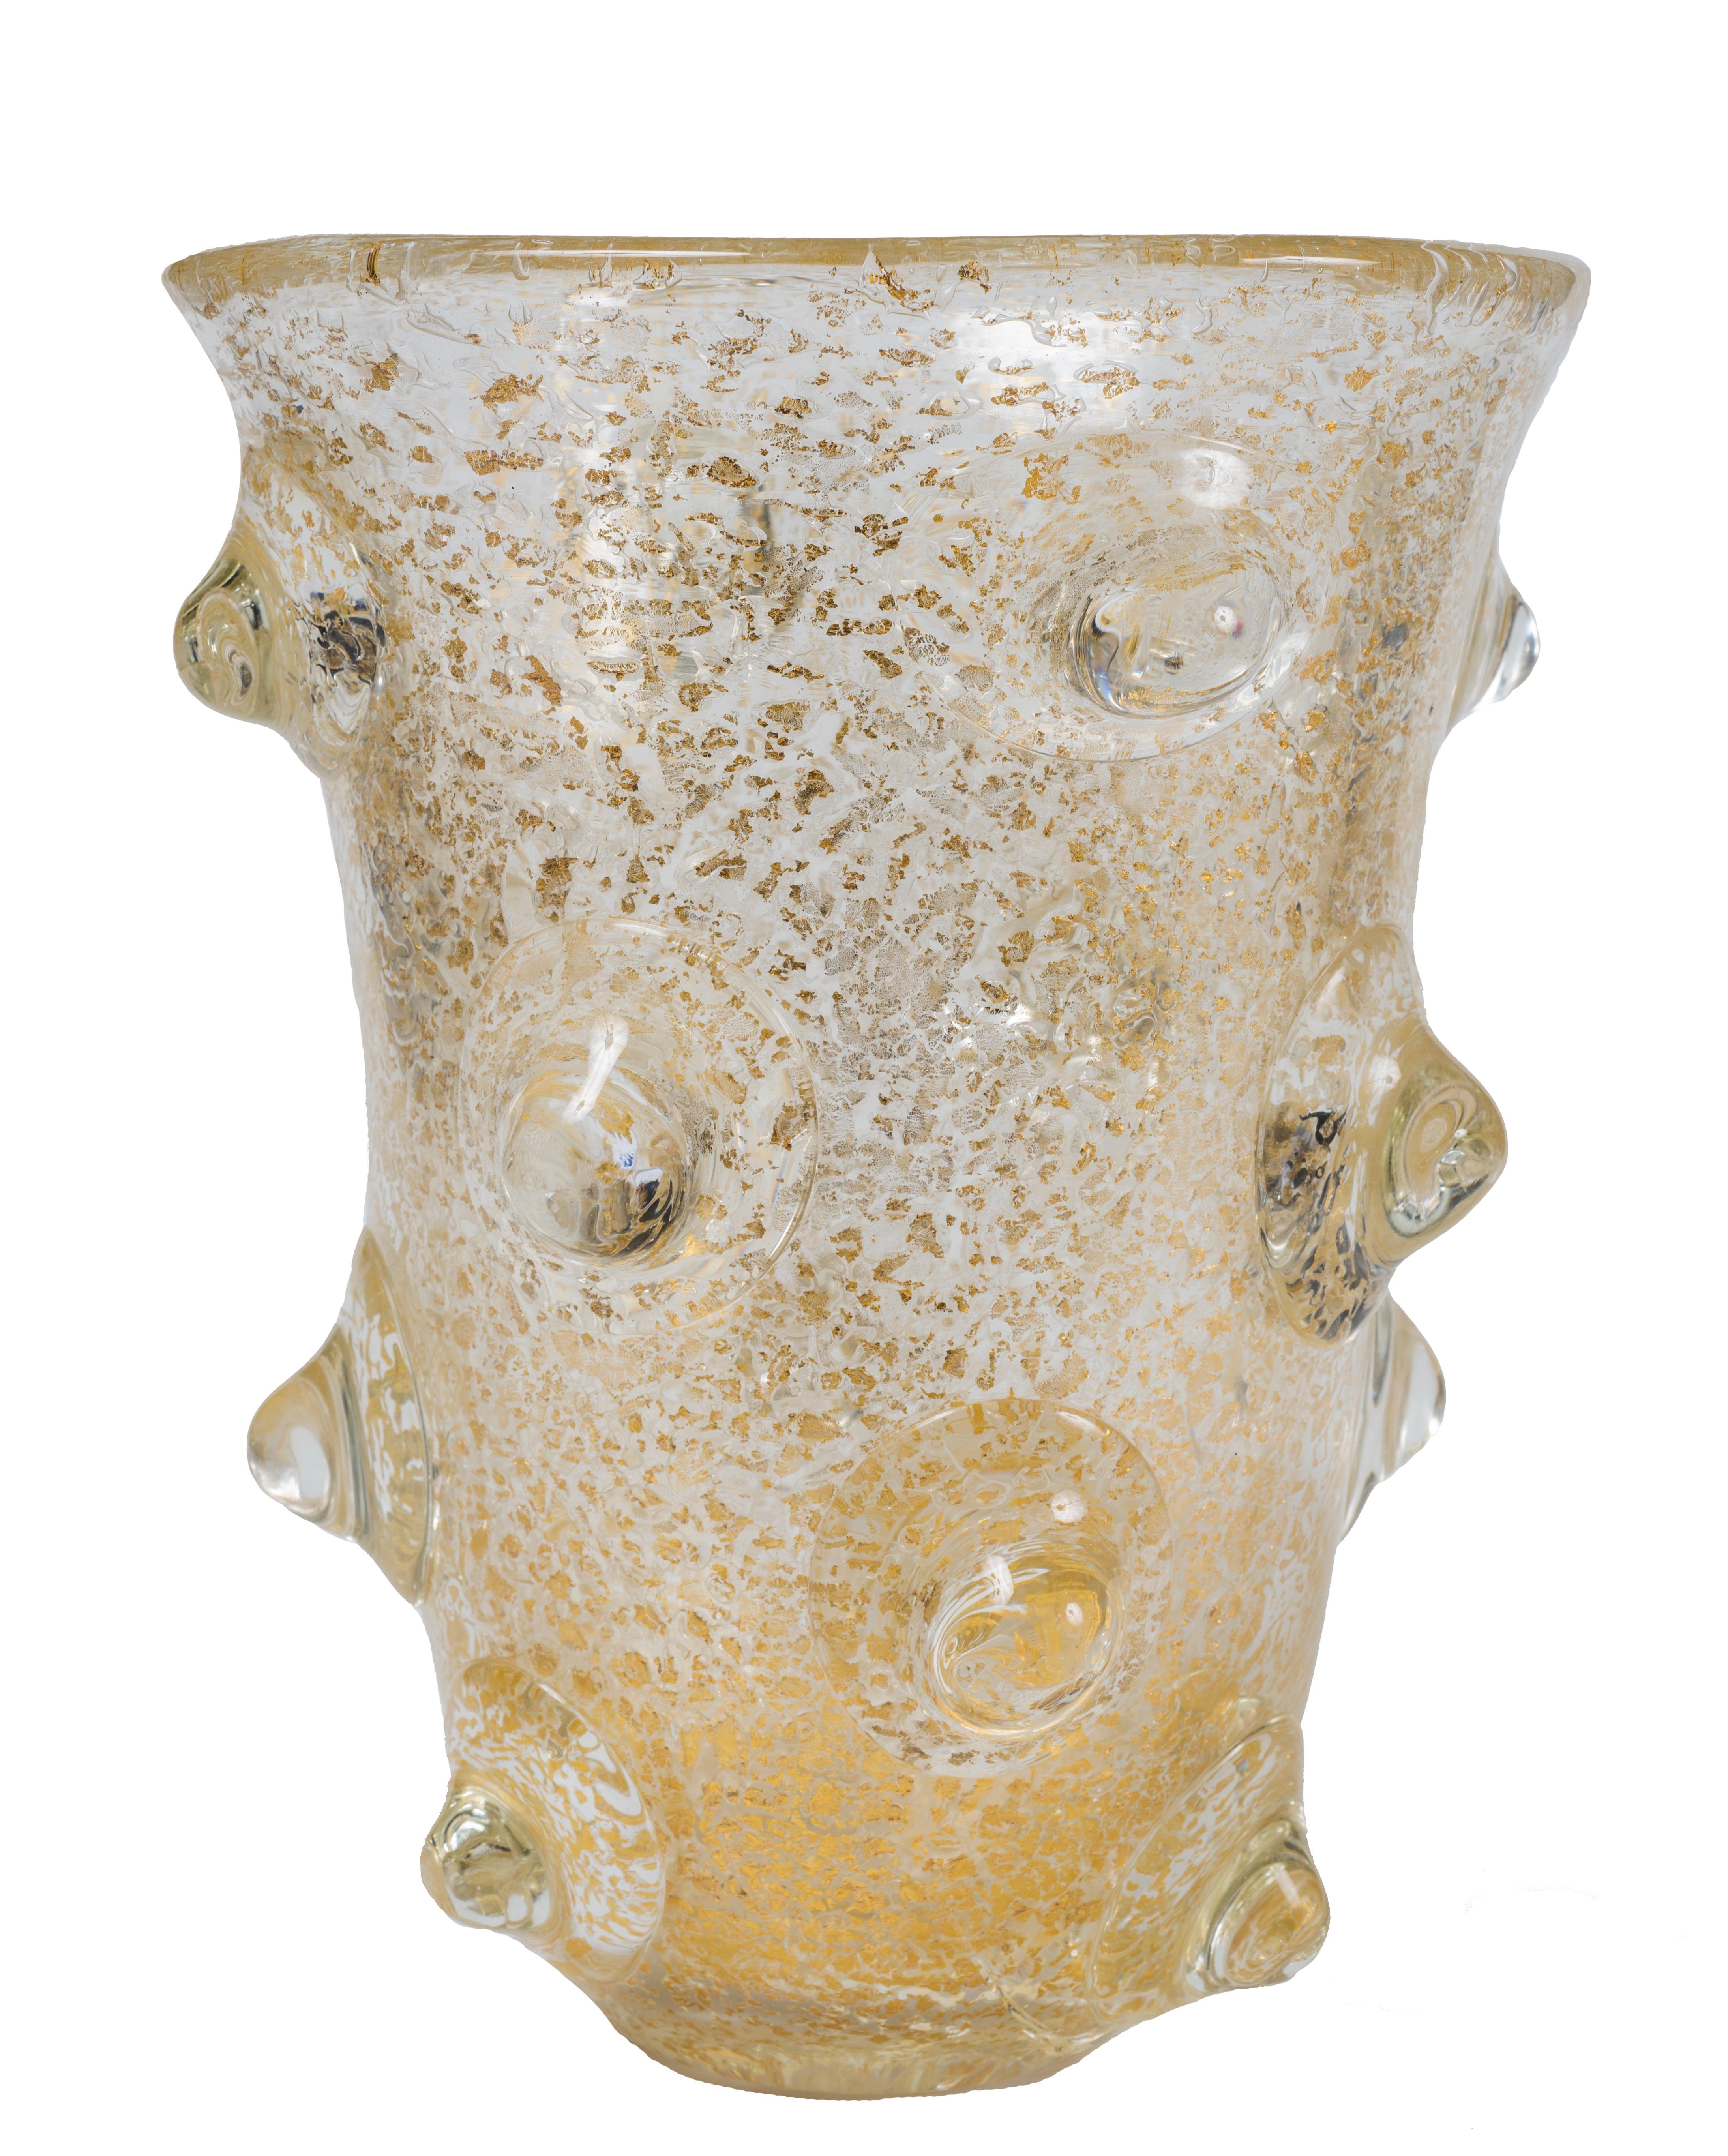 Mugnoni Vase is an elegant Murano-glass vase realized by Ercole Barovier for Barovier & Toso in 1938 ca.

The vase is decorated with large hemispherical reliefs with air bubbles.

Fair conditions. Minor diagonal scratch of 9 cm. ca. starting